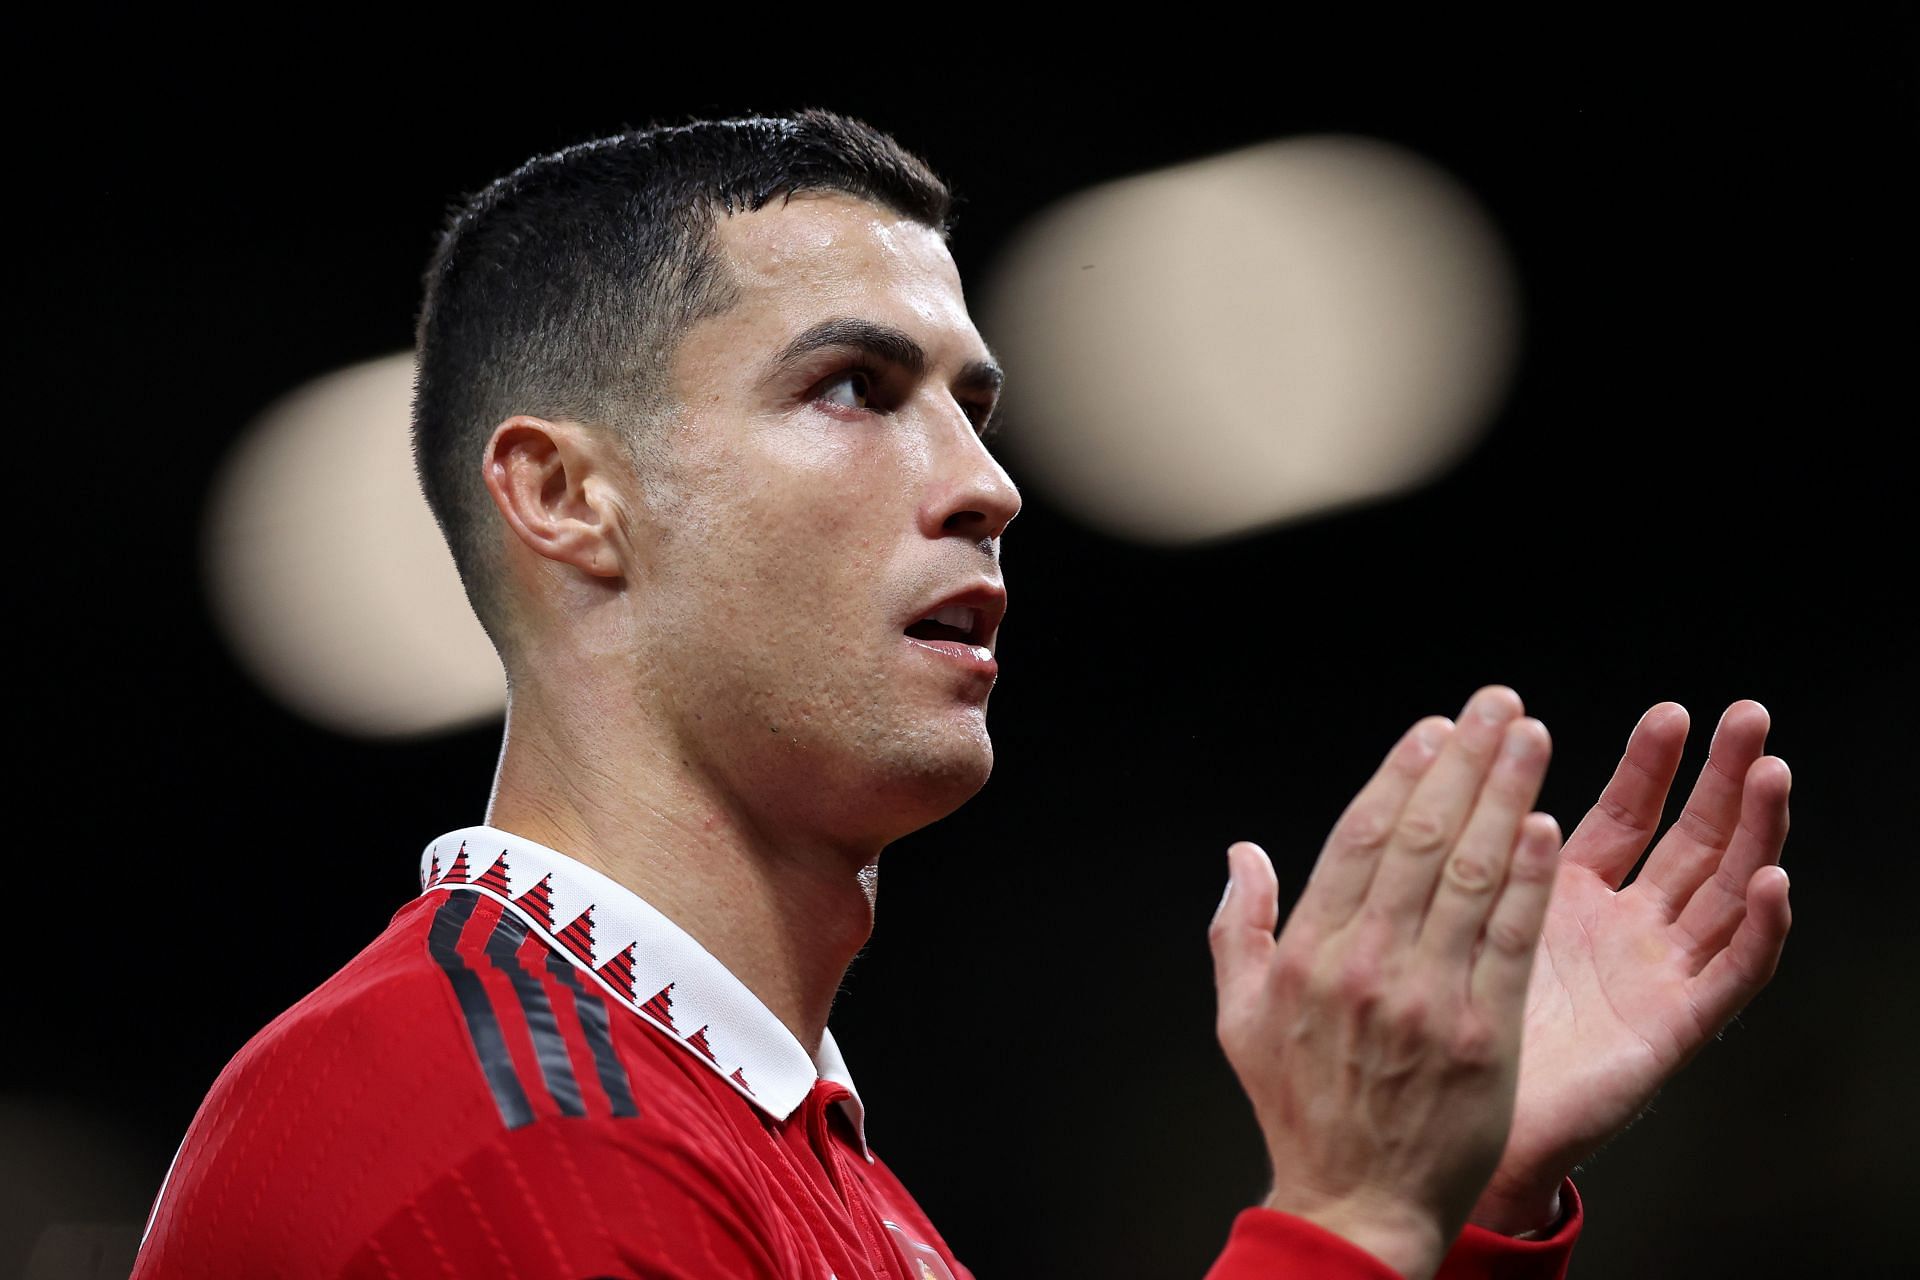 Manchester United analysts believe one player tried to impress the Portugal superstar by passing to him in games.